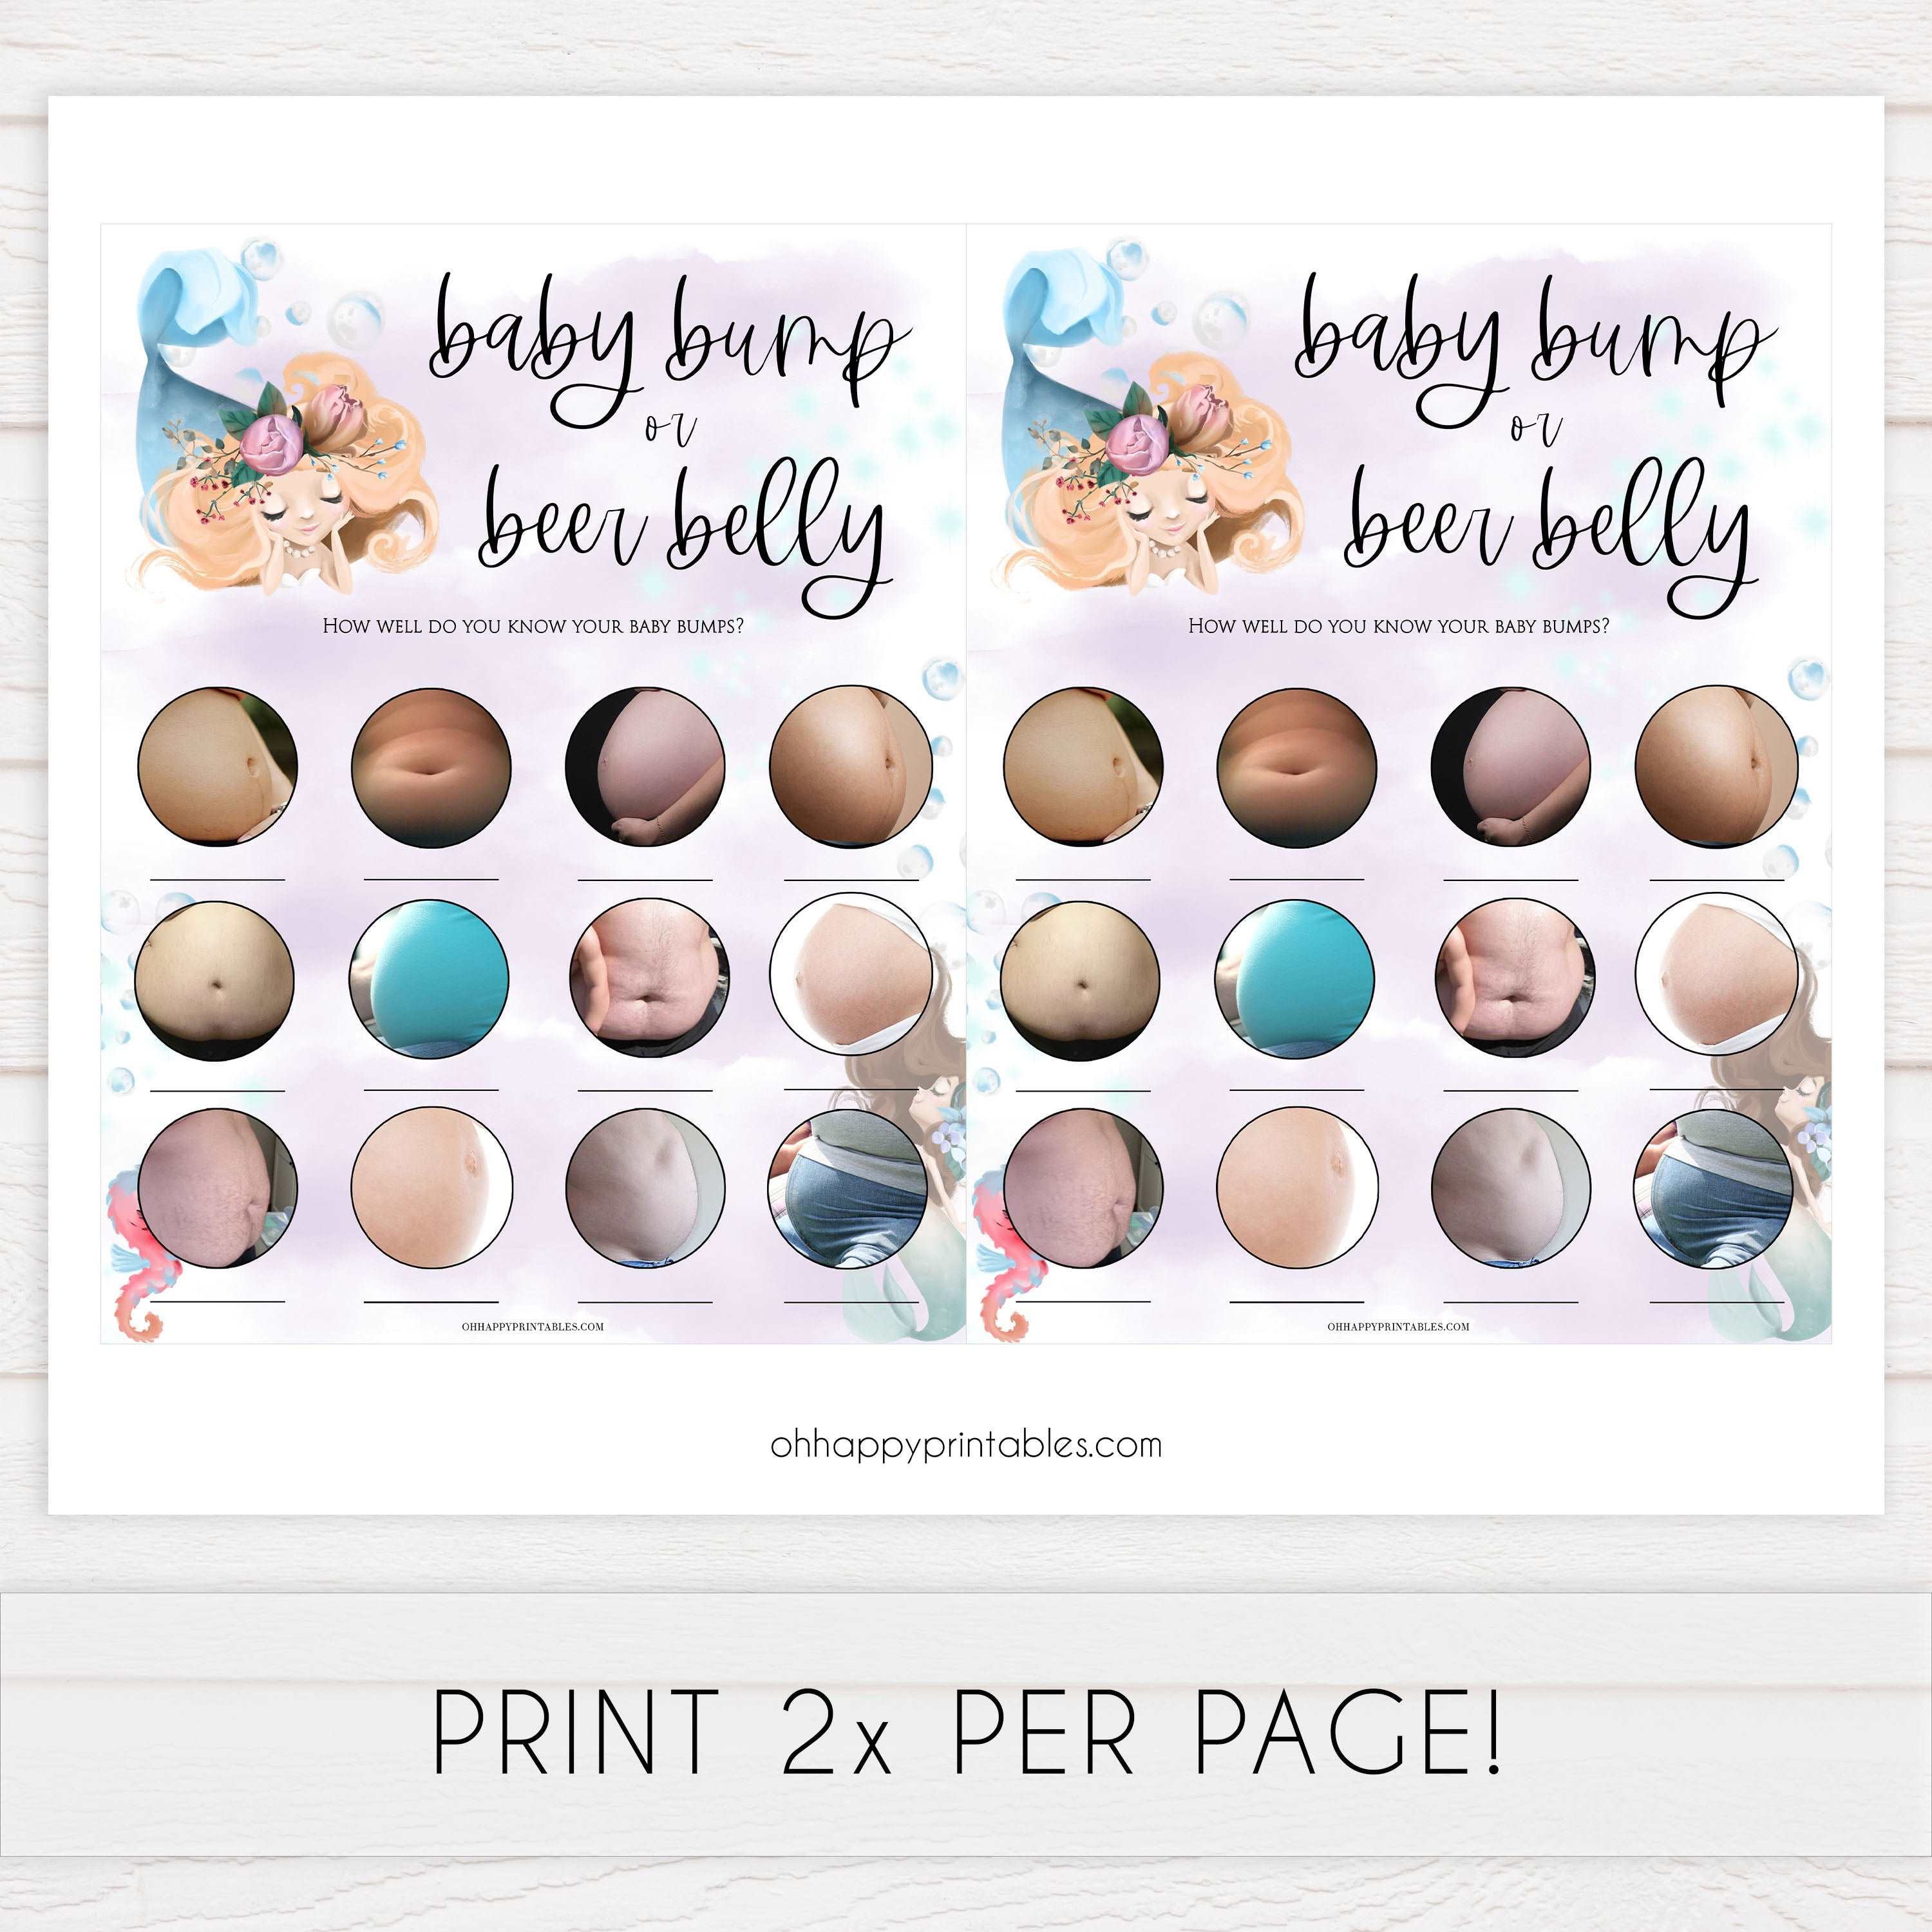 labor or porn game, baby bump or beer belly, Printable baby shower games, little mermaid baby games, baby shower games, fun baby shower ideas, top baby shower ideas, little mermaid baby shower, baby shower games, pink hearts baby shower ideas